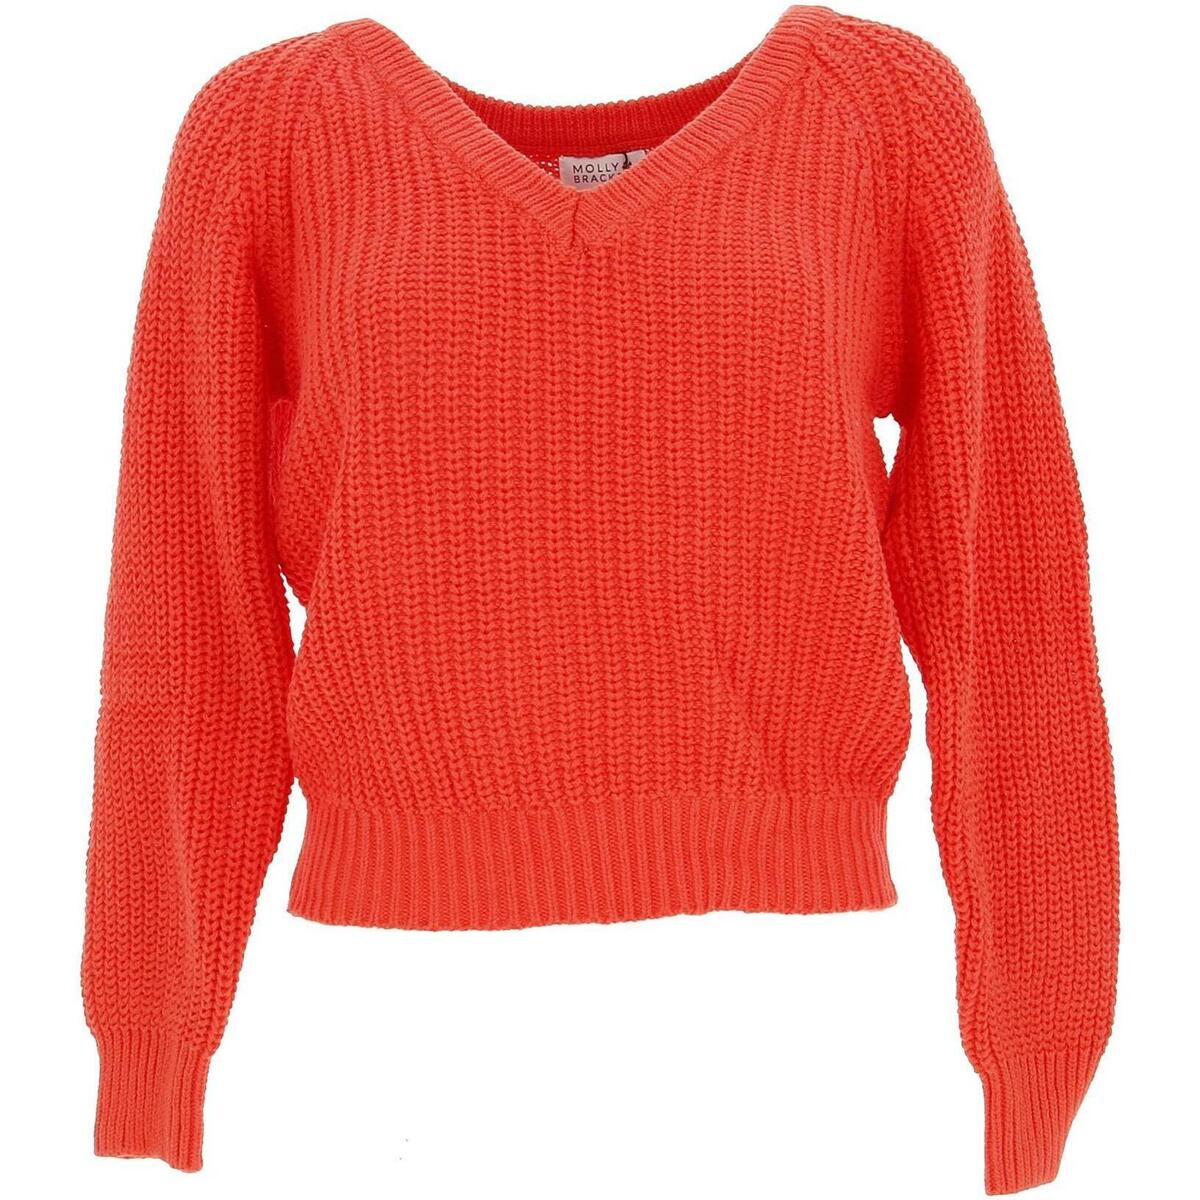 Vêtements Femme Pulls Molly Bracken Knitted sweater ladies coral Autres